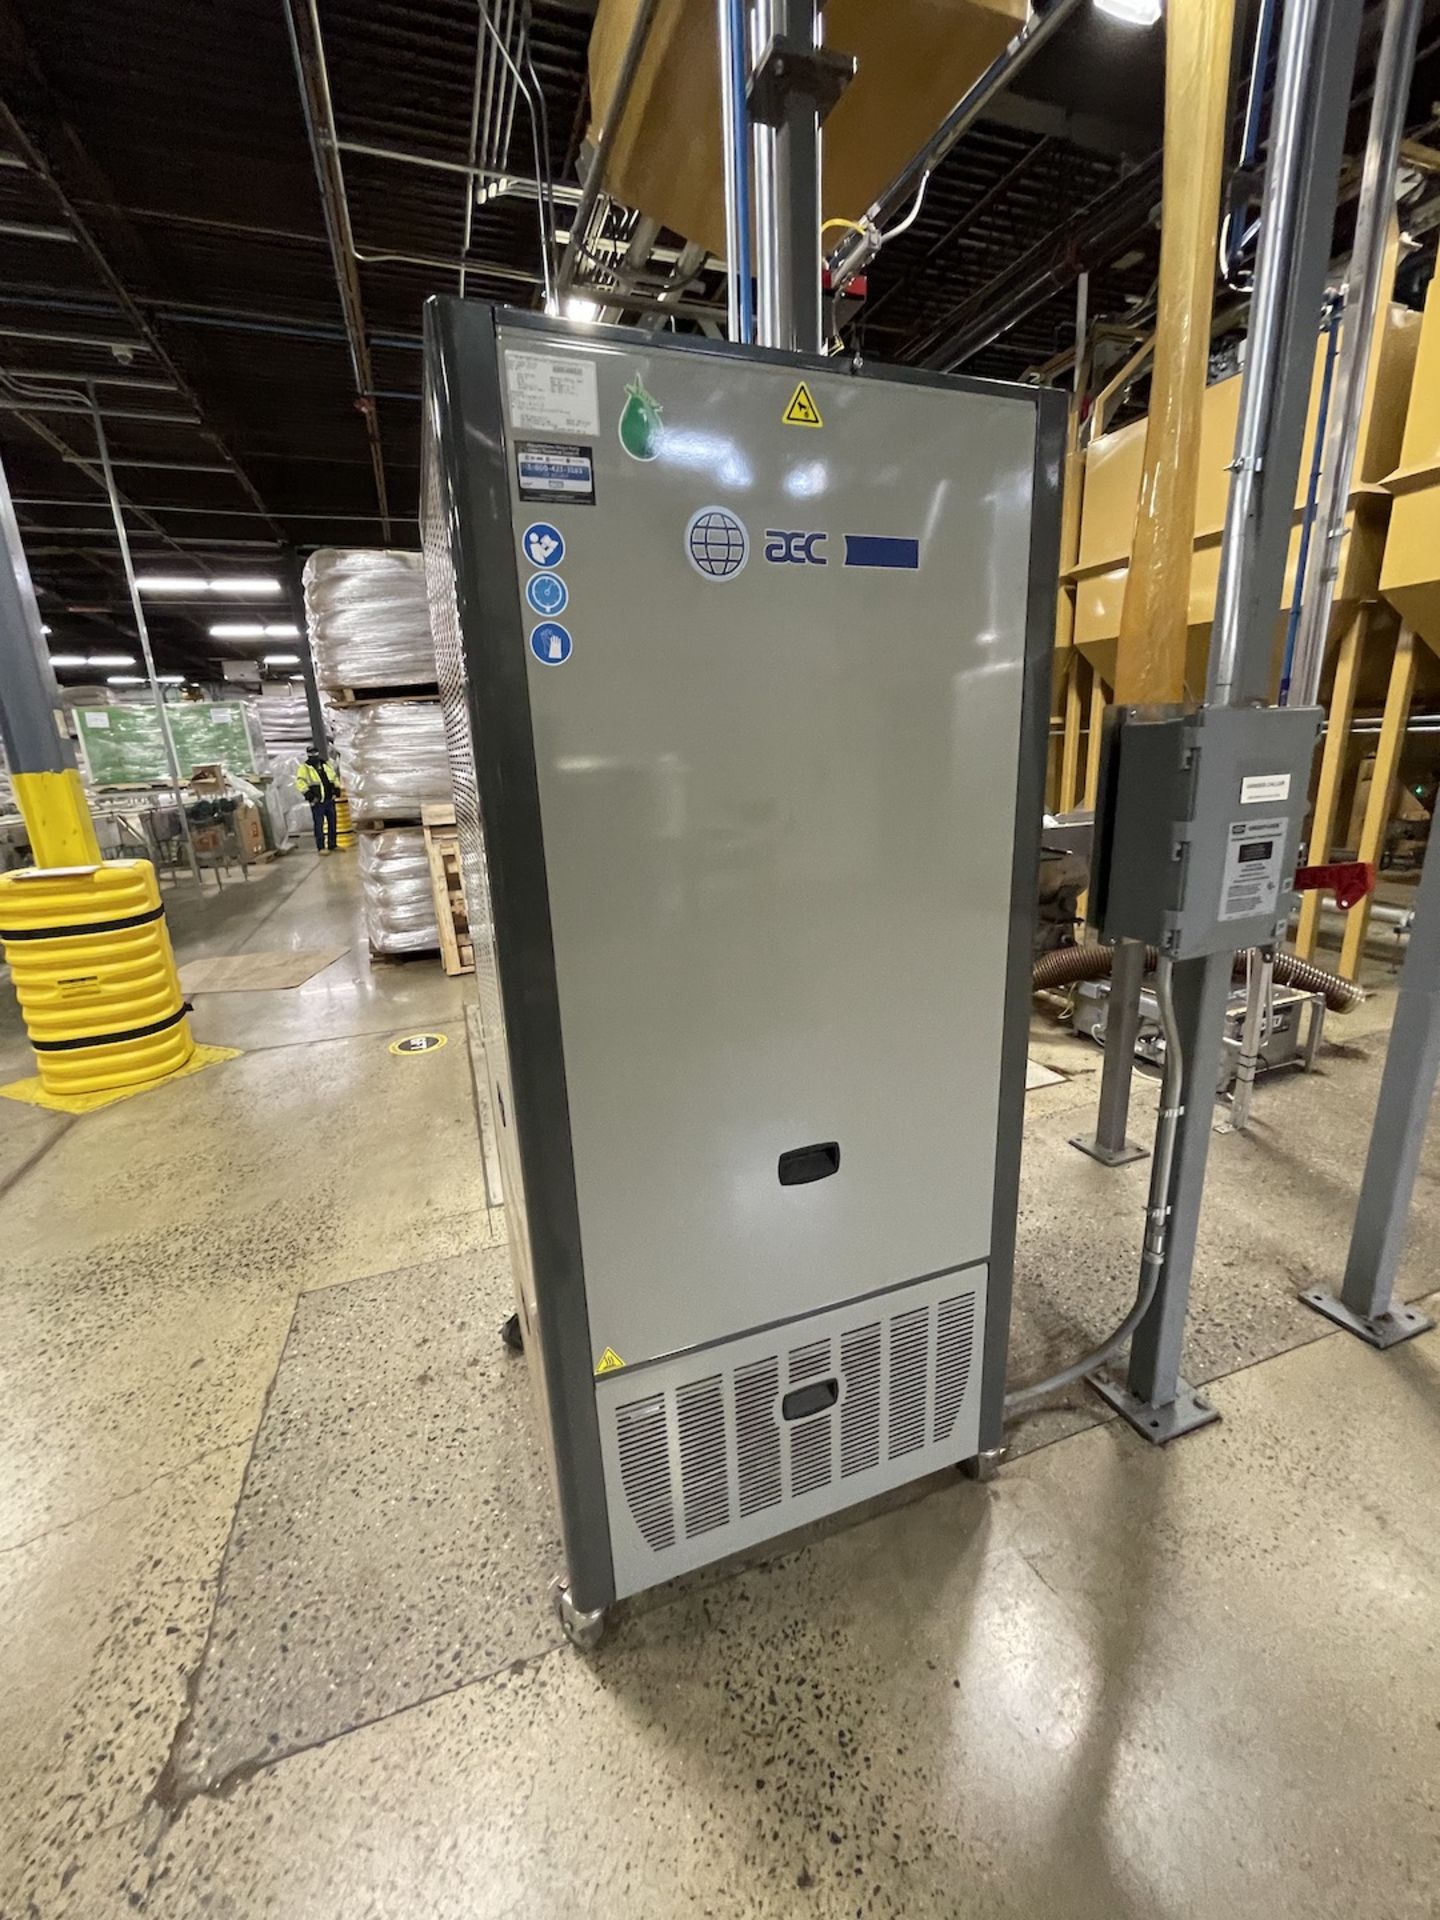 AEC WHITLOCK PACKAGED CHILLER, MODEL GPAC-30, S/N 49F0079, R-410A REFRIGERANT, (1) 7.5 HP - Image 2 of 3